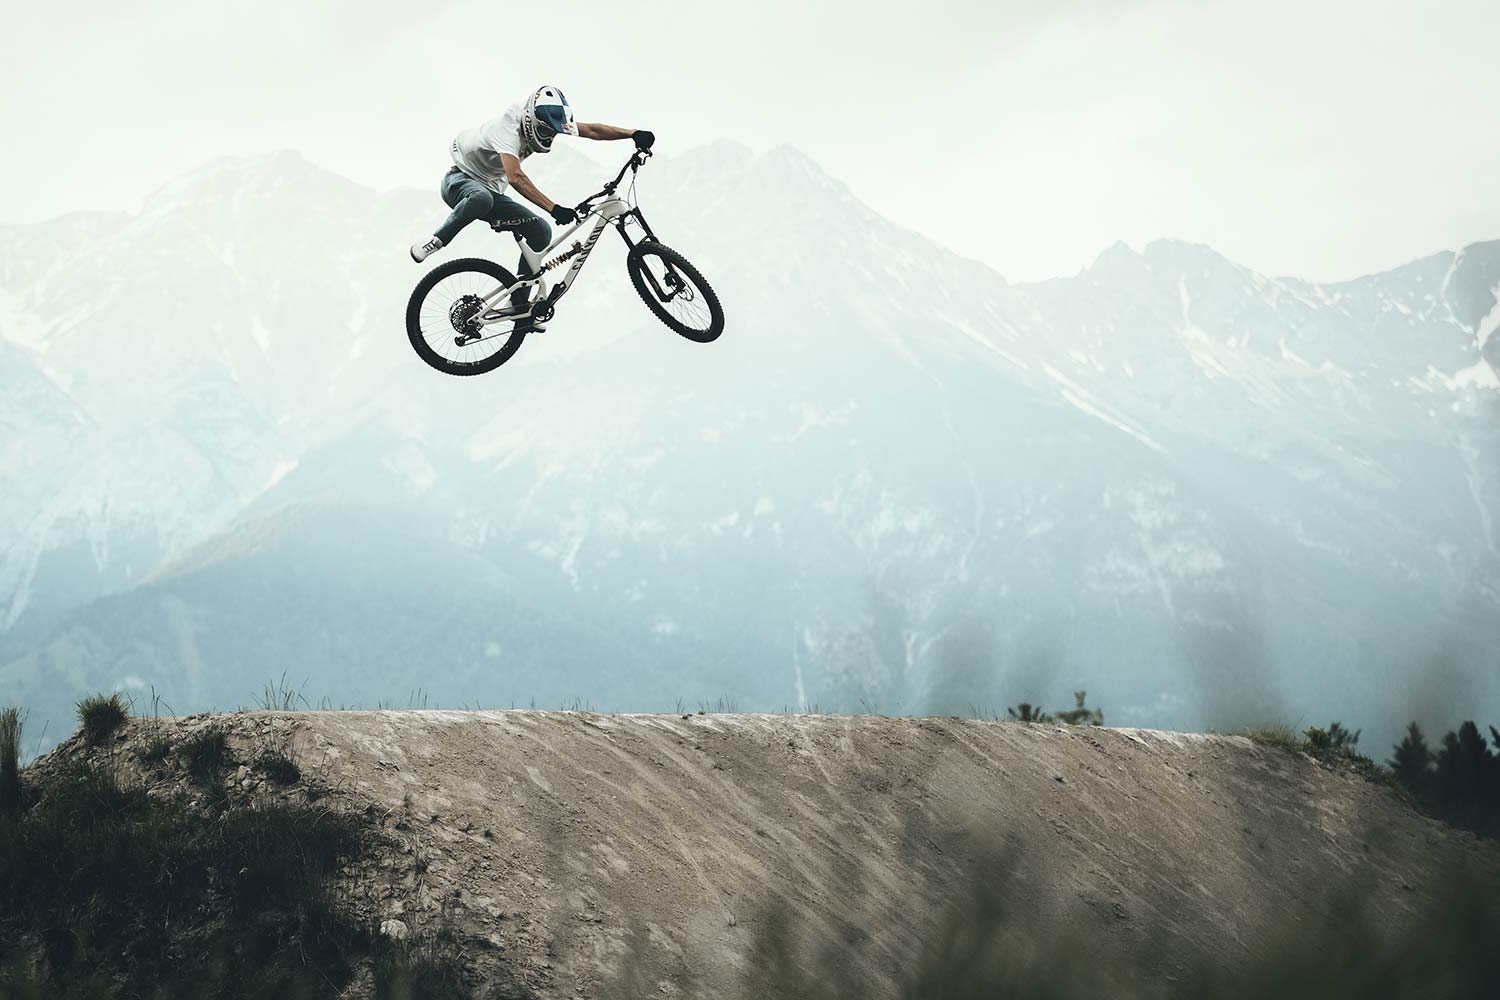 Canyon Torque CF Fabio Wibmer Signature Edition limited pro carbon freeride enduro bike, jump photo by Hannes Berger